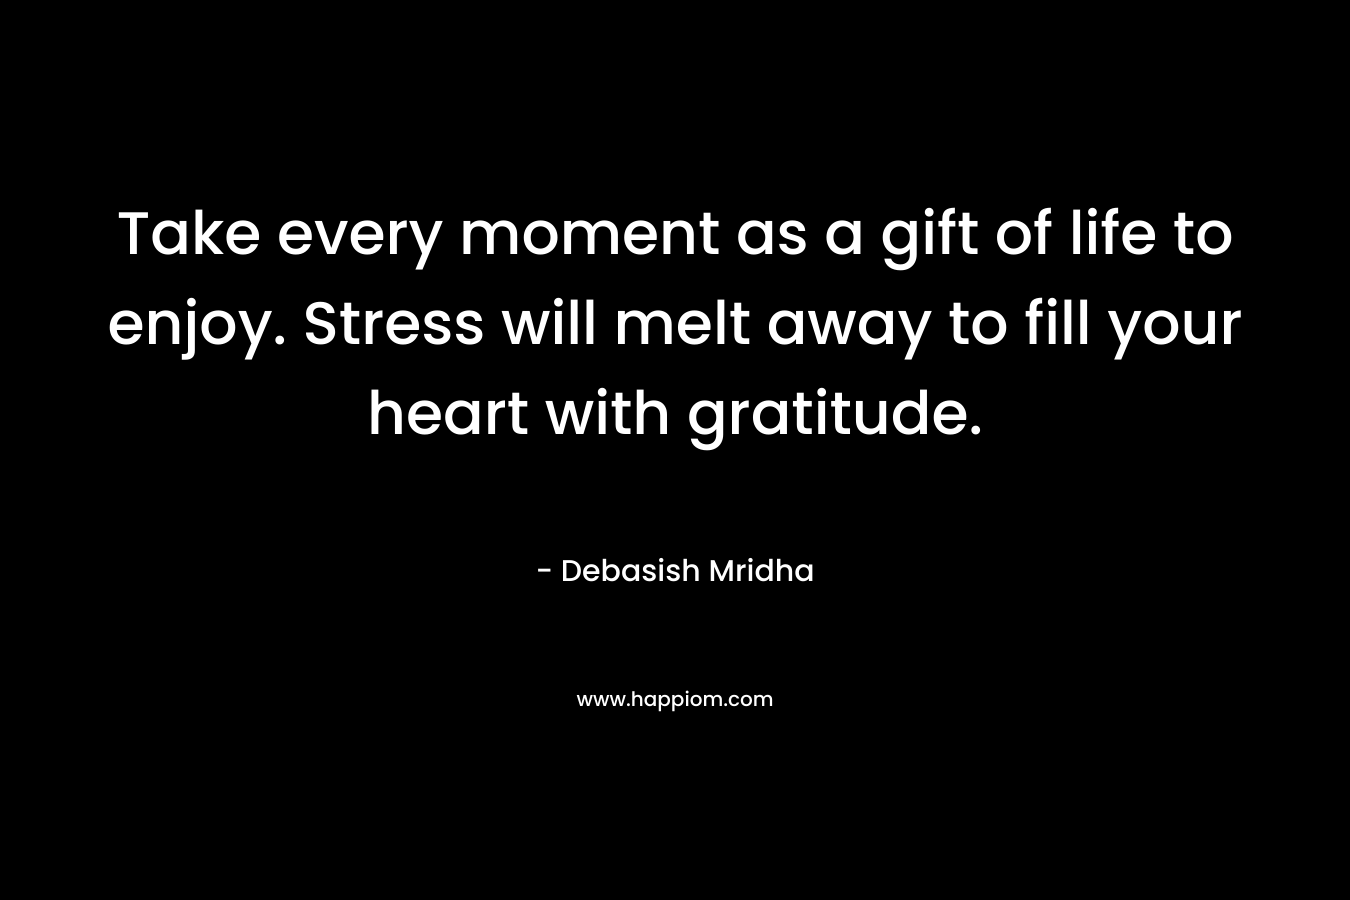 Take every moment as a gift of life to enjoy. Stress will melt away to fill your heart with gratitude.